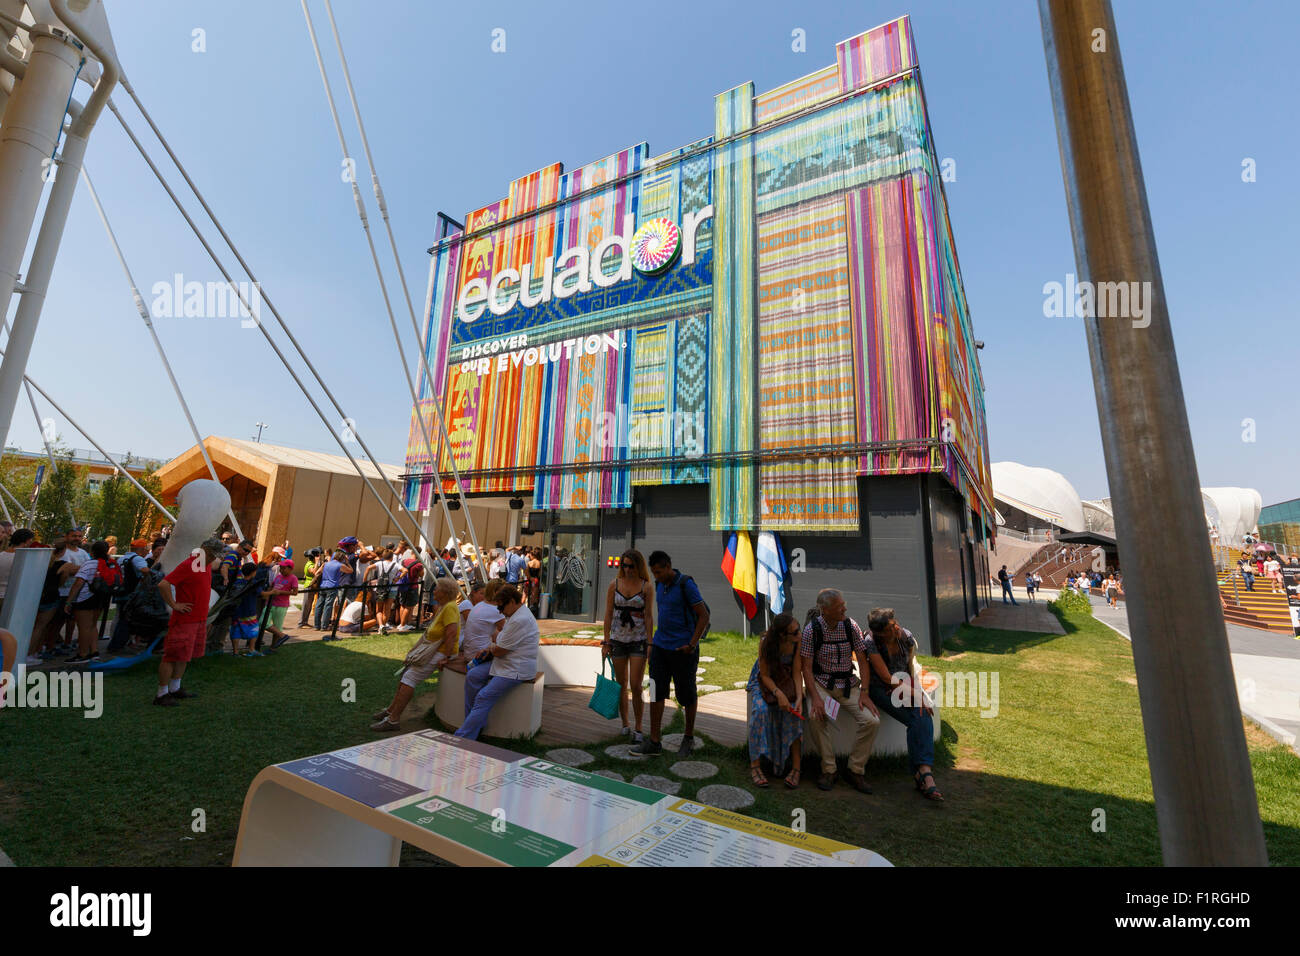 Milan, Italy, 12 August 2015: Detail of the Equador pavilion at the exhibition Expo 2015 Italy. Stock Photo